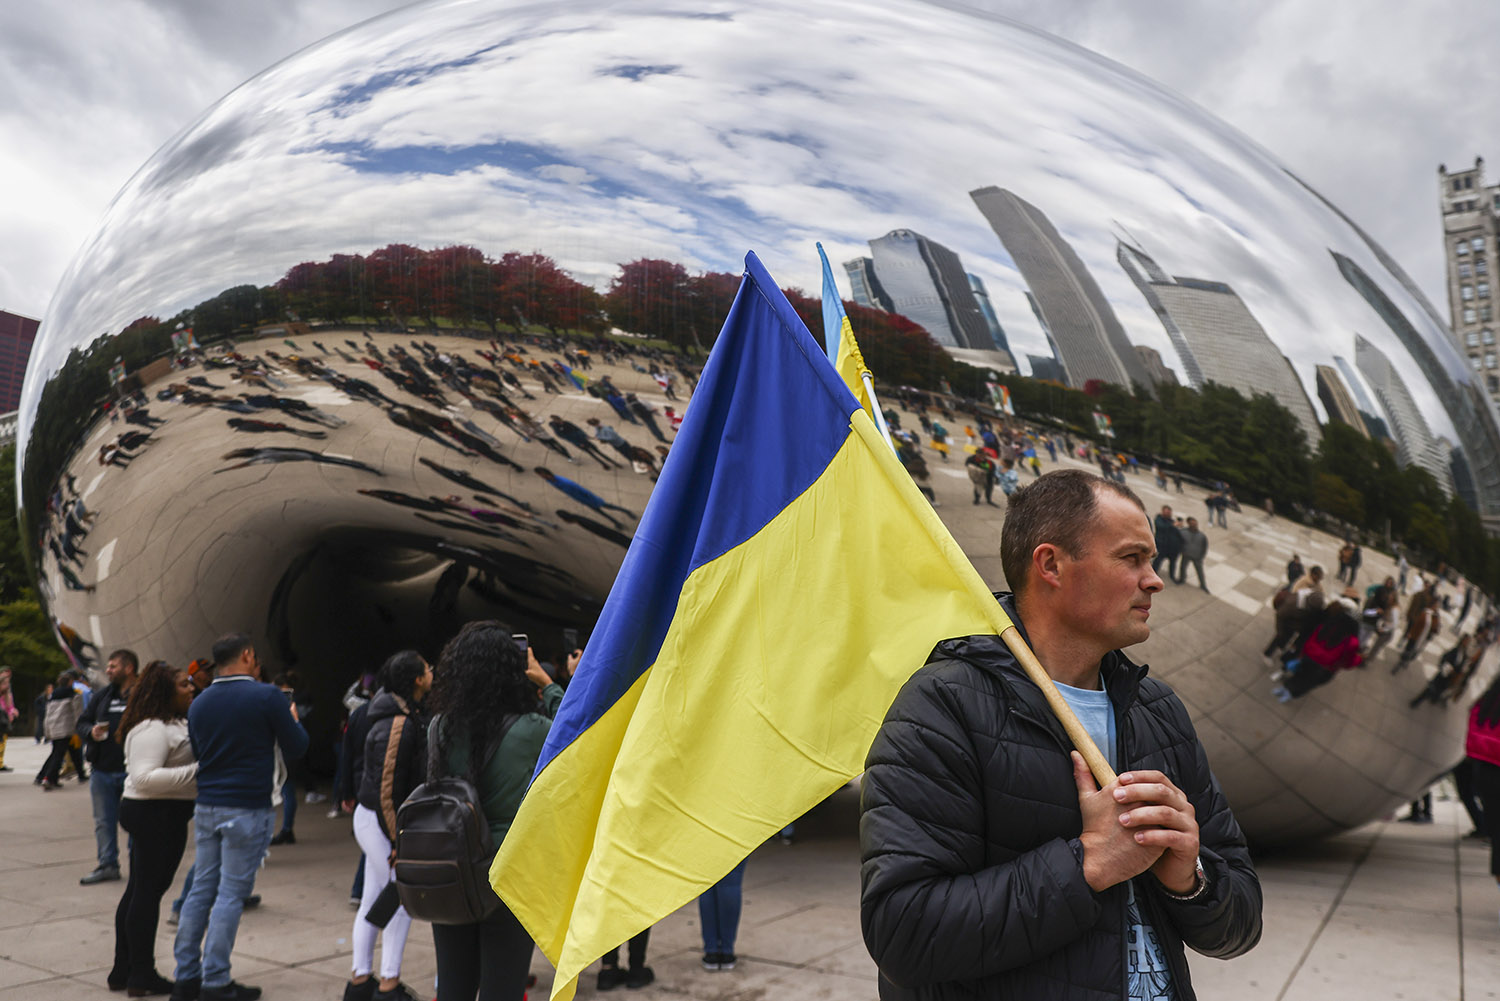 A man holds a Ukrainian flag during a solidarity demonstration in Chicago.